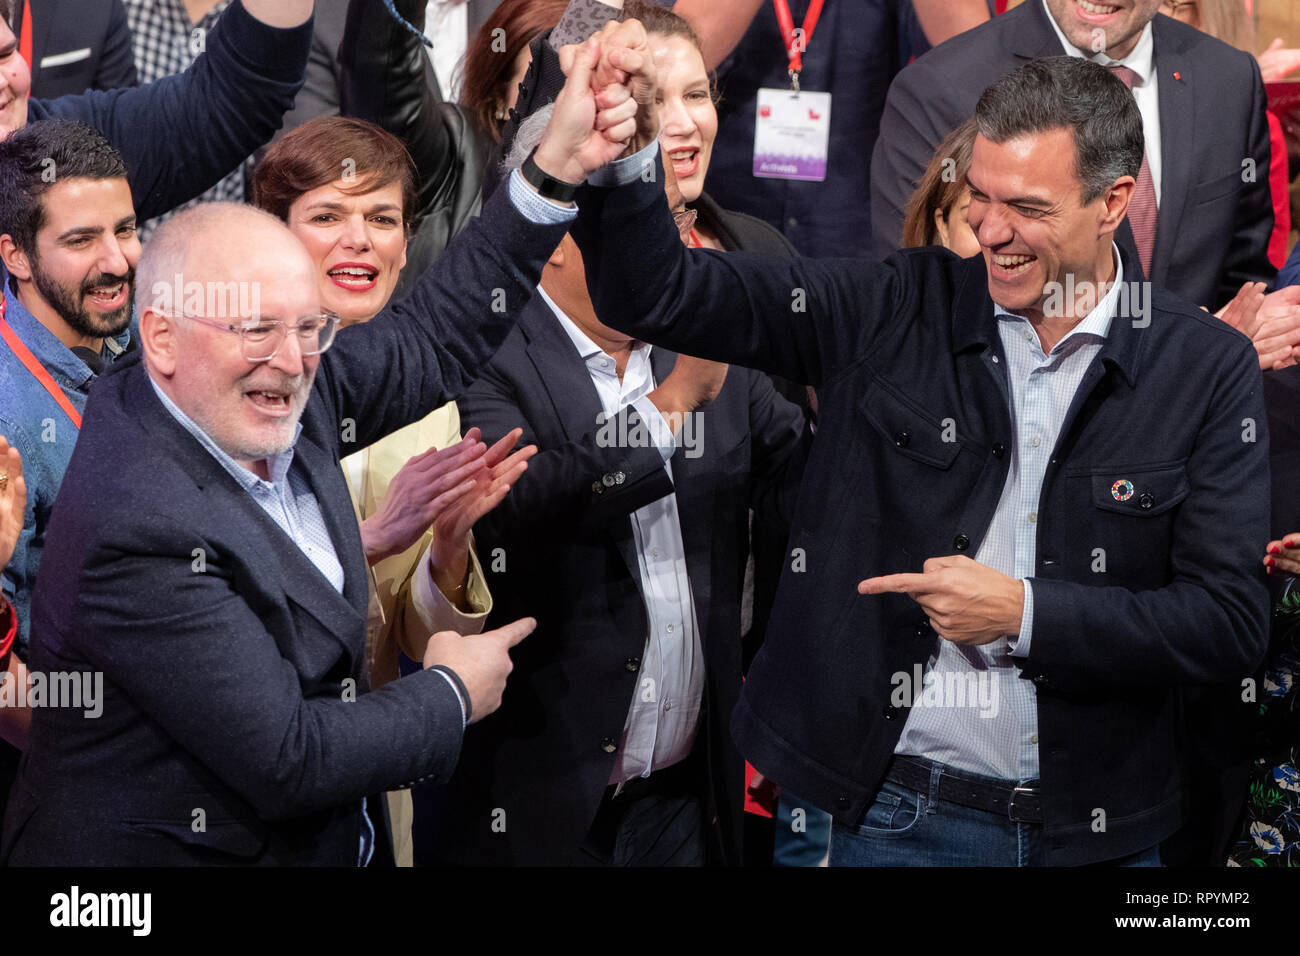 Madrid, Spain. 23rd February, 2019. Frans Timmermans(L), PES Common Candidate and Pedro Sanchez(R), Prime Ministre Spain attending Congress European Socialist Party (PES) in Madrid Credit: Jesús Hellin/Alamy Live News Stock Photo